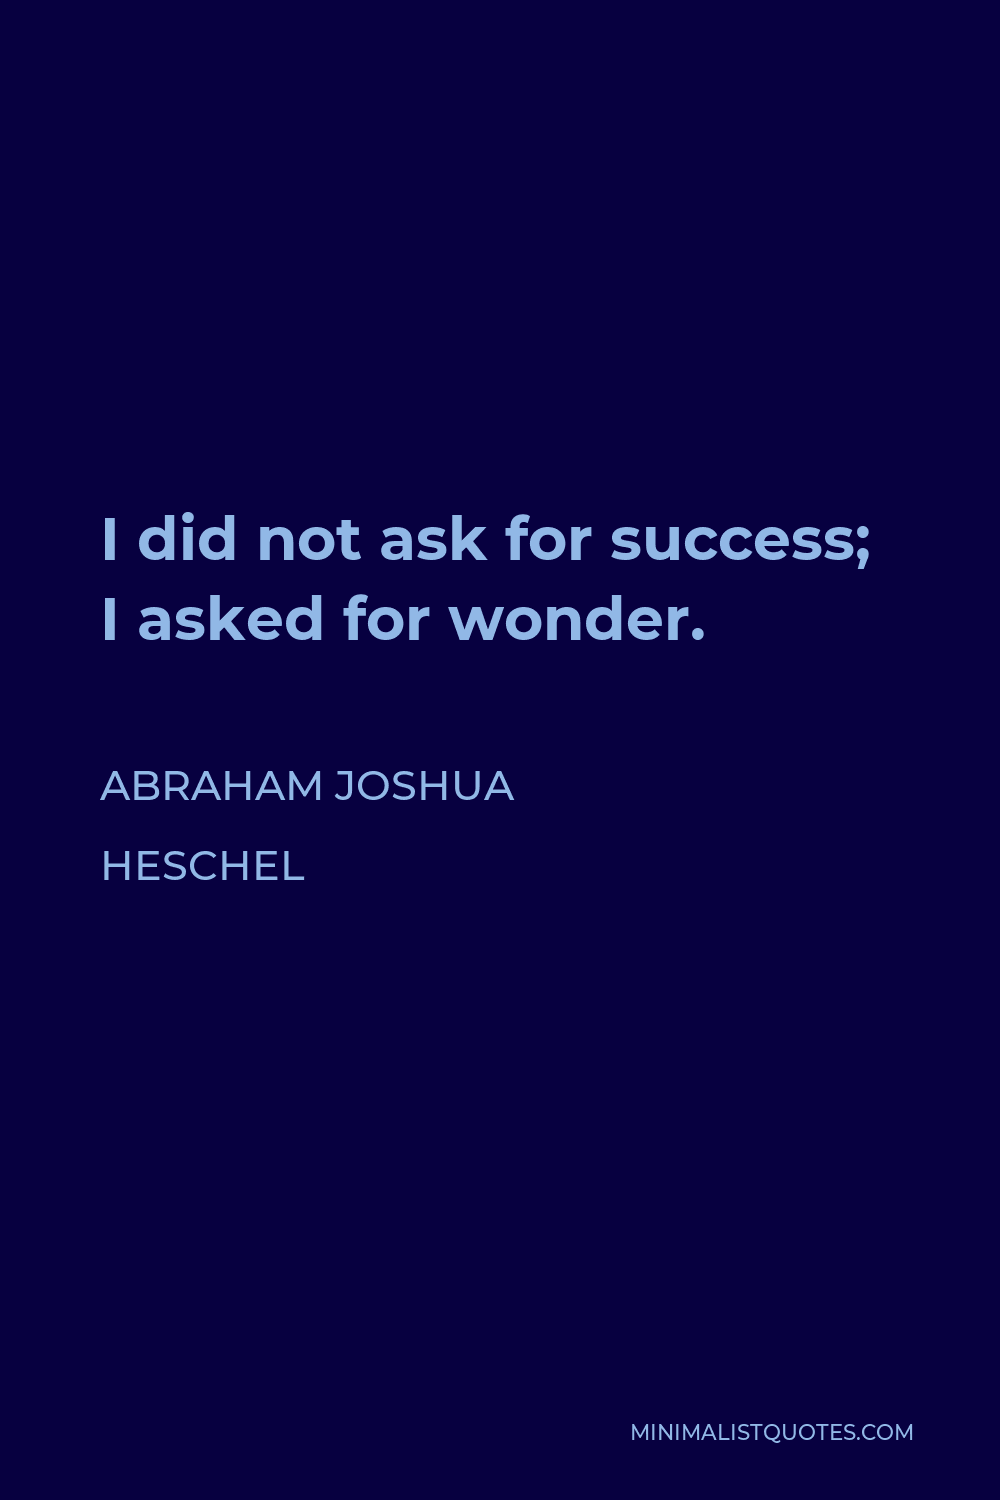 Abraham Joshua Heschel Quote - I did not ask for success; I asked for wonder.